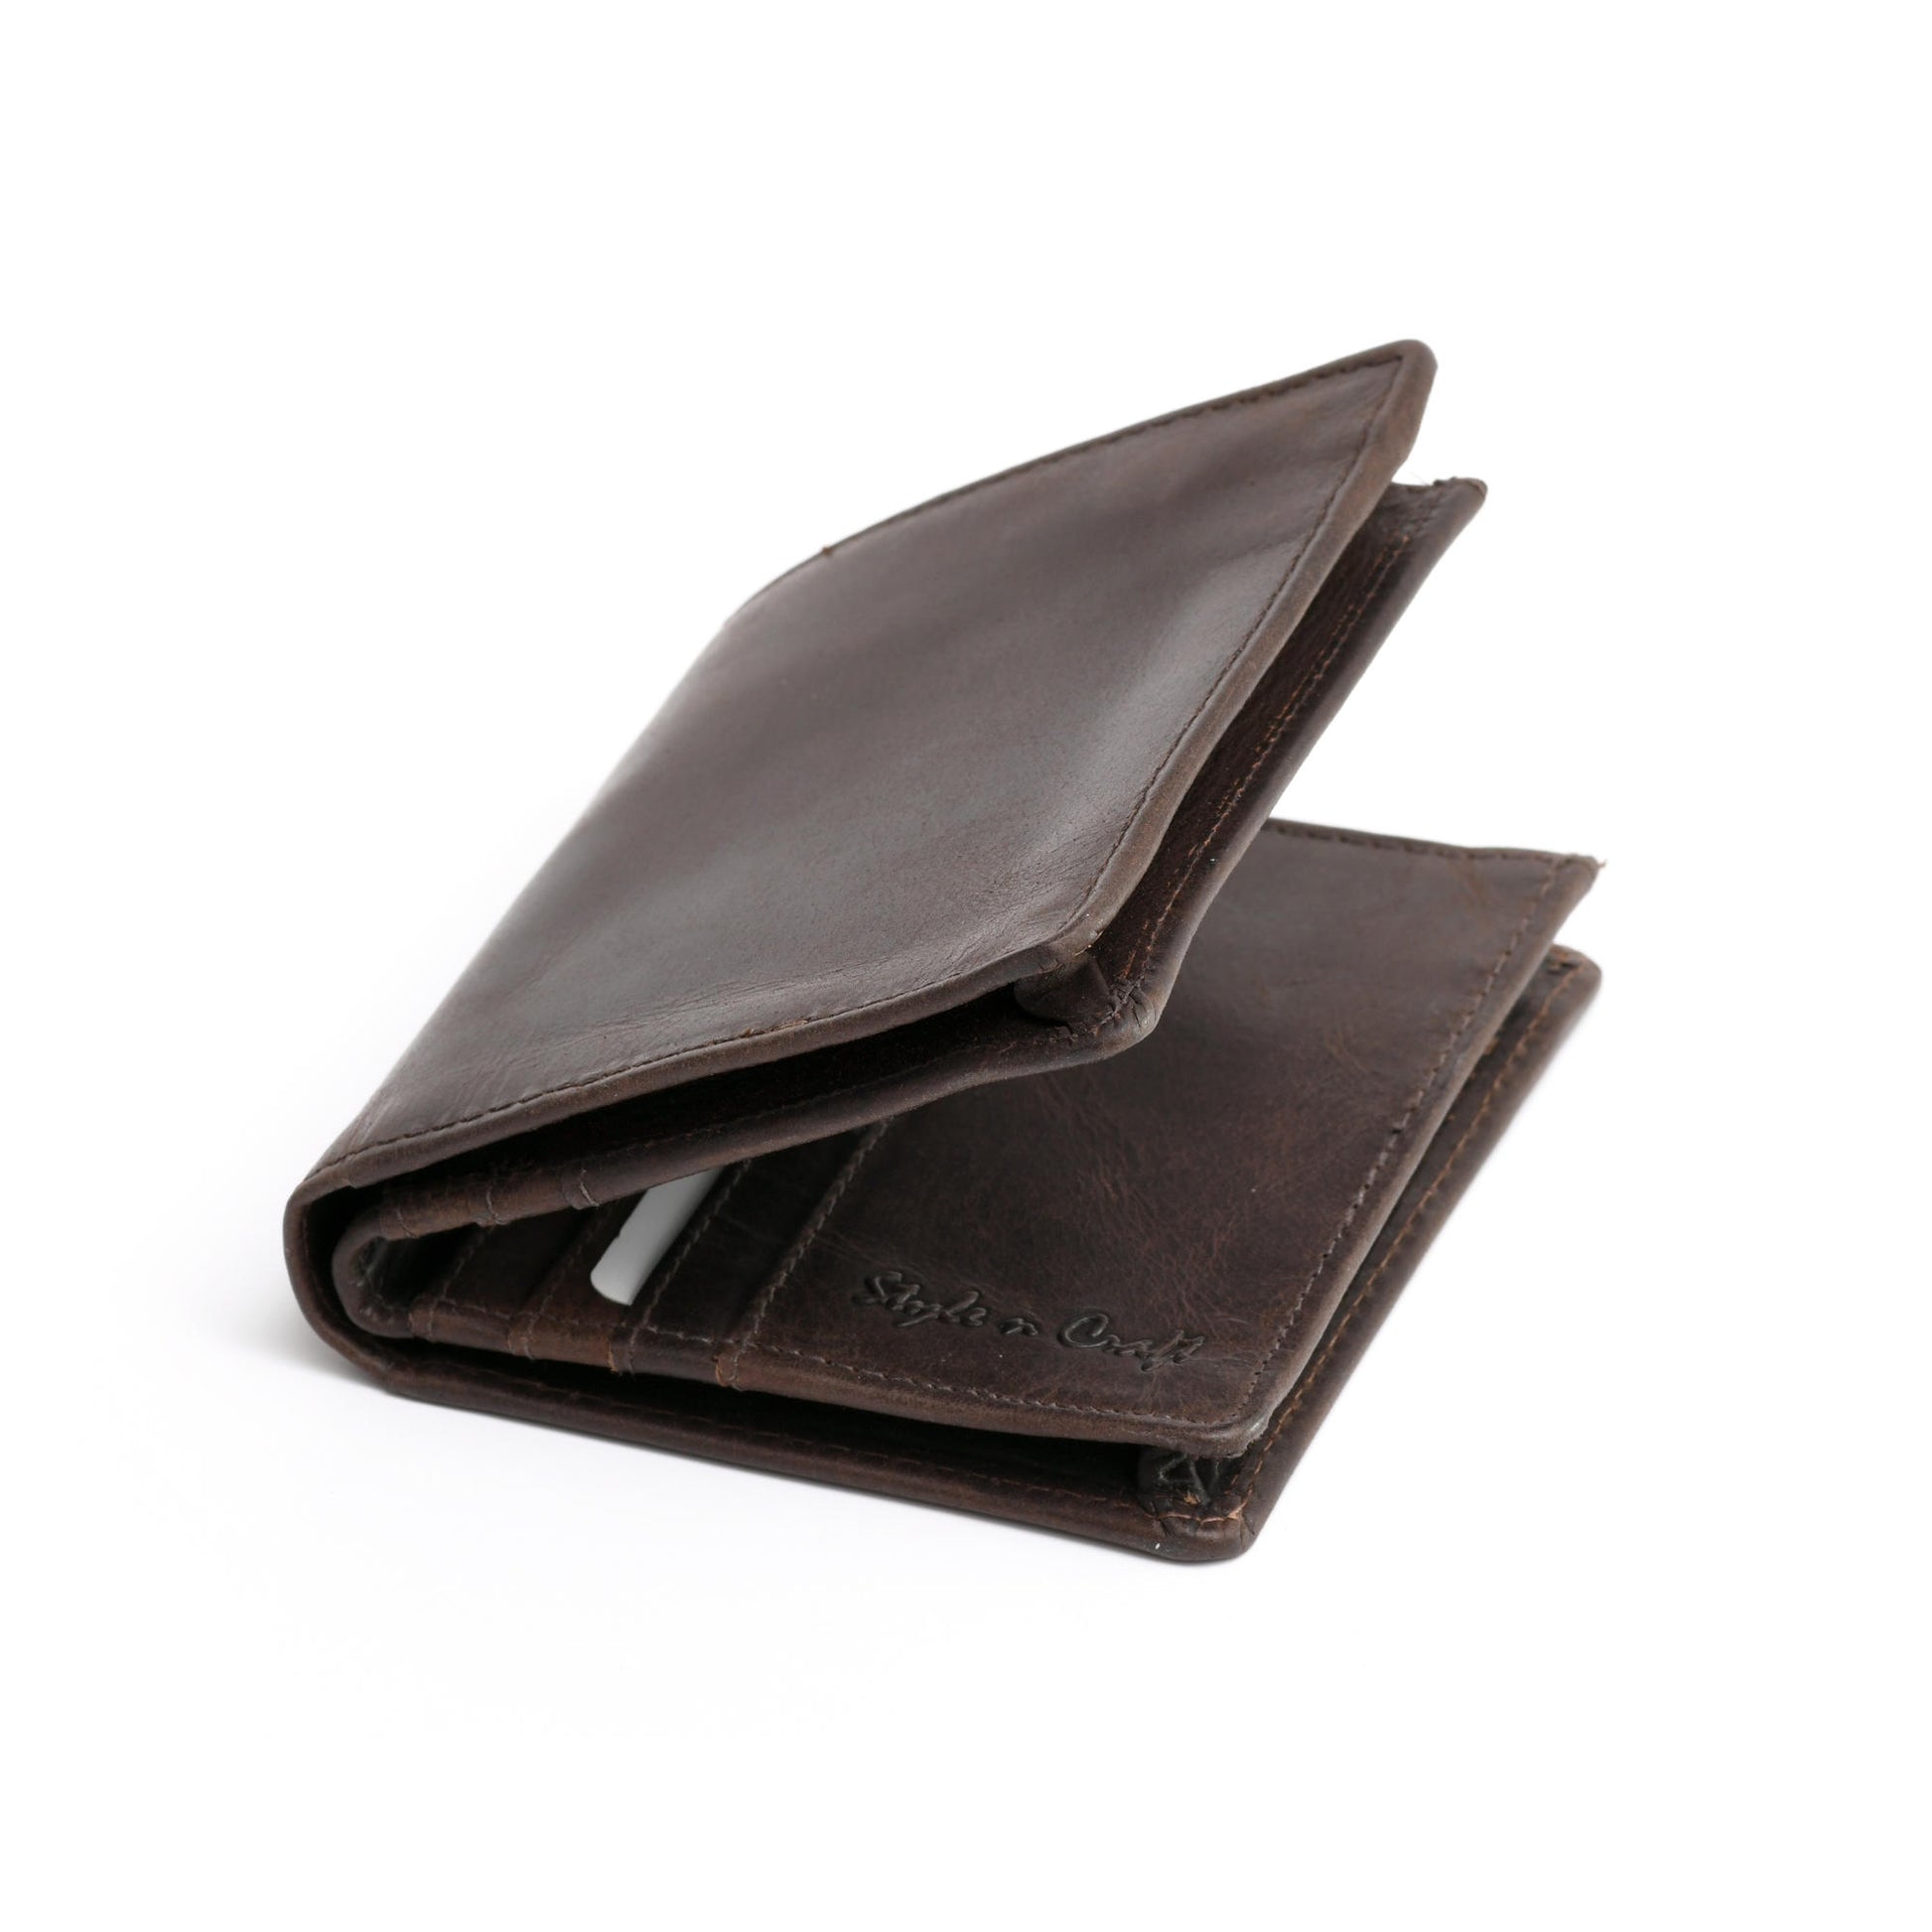  GEEAD Small Wallets for Women Slim Bifold Credit Card